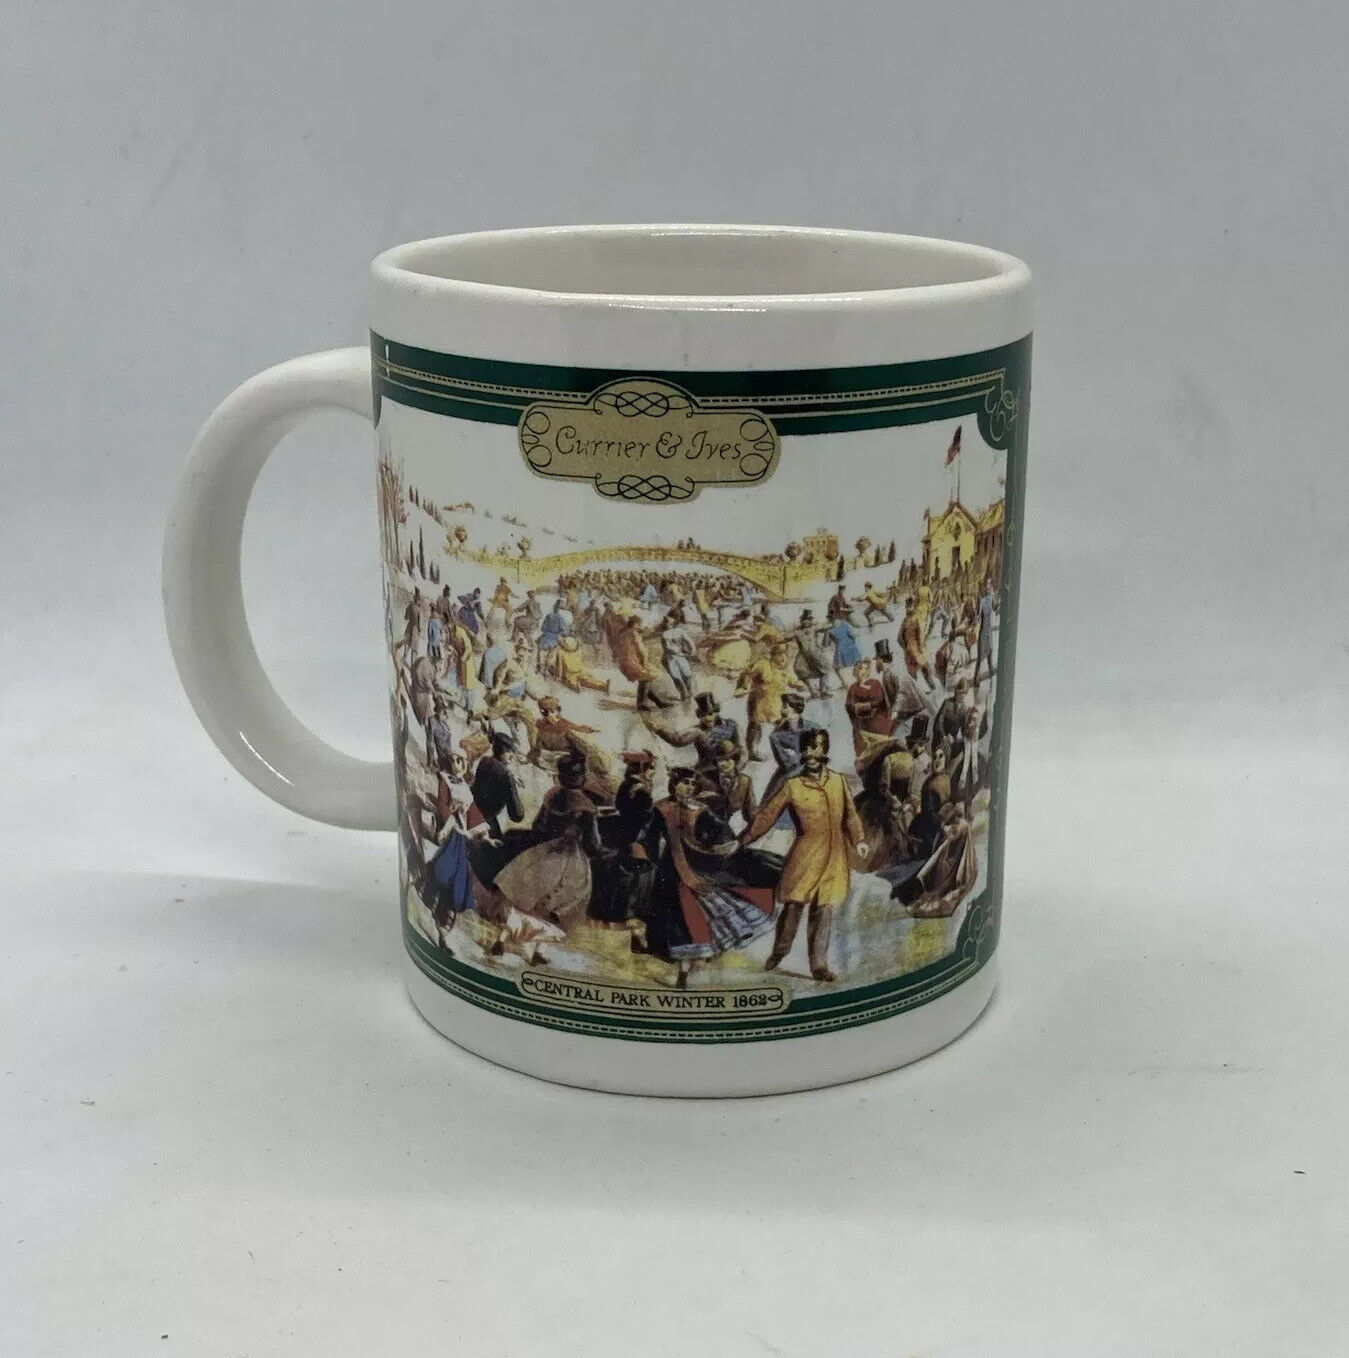 Vintage Currier and Ives Christmas Central Park Winter 1862 Coffee Tea Mug 16